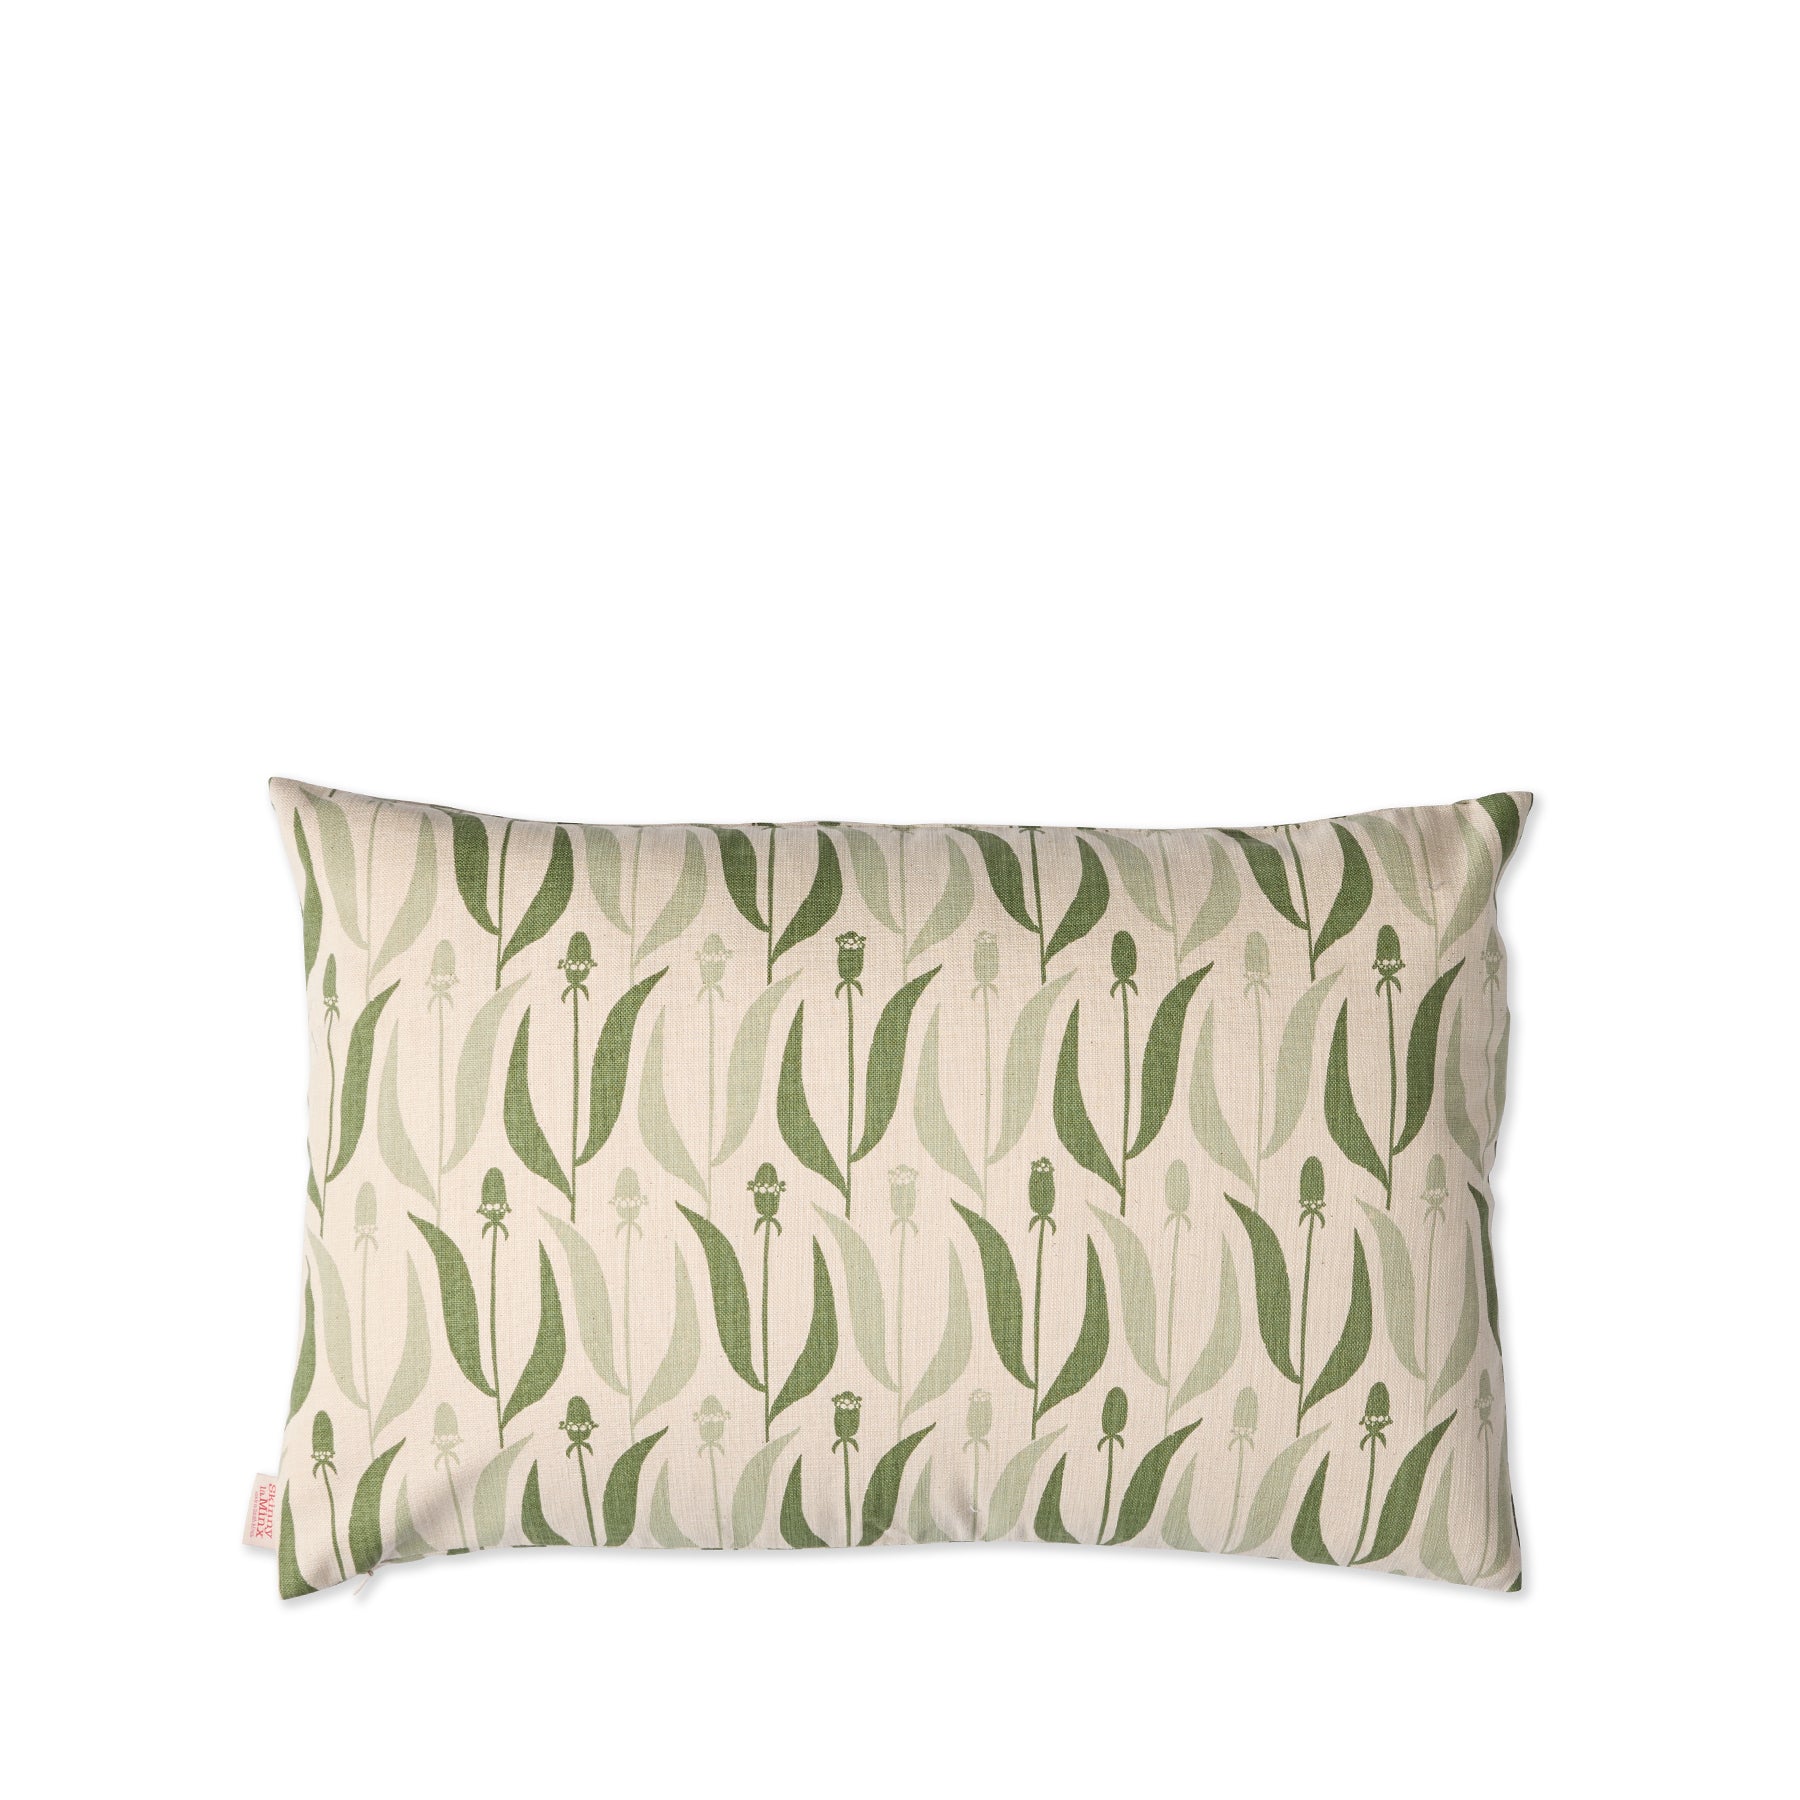 Flower Ring Pillow in Jade and Spruce Zoom Image 1